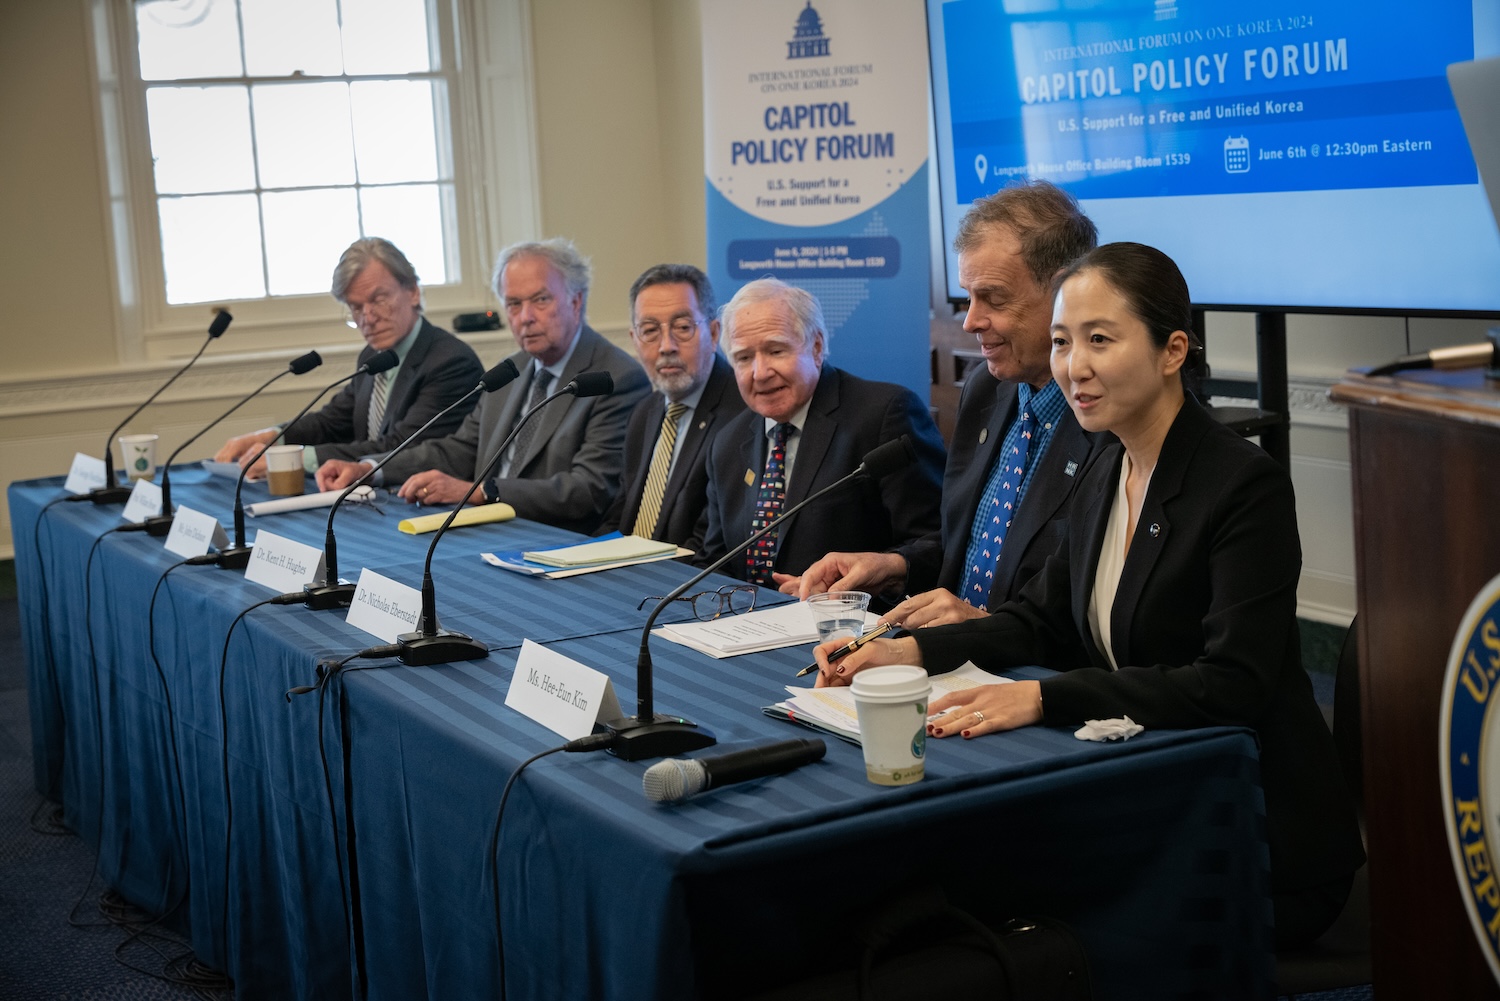 Six individuals sit at a panel table with microphones and nameplates in front of them, participating in the Capitol Policy Forum. A blue Capitol Policy Forum banner is displayed in the background, announcing an International Forum on policy issues impacting various regions, including a Unified Korea.